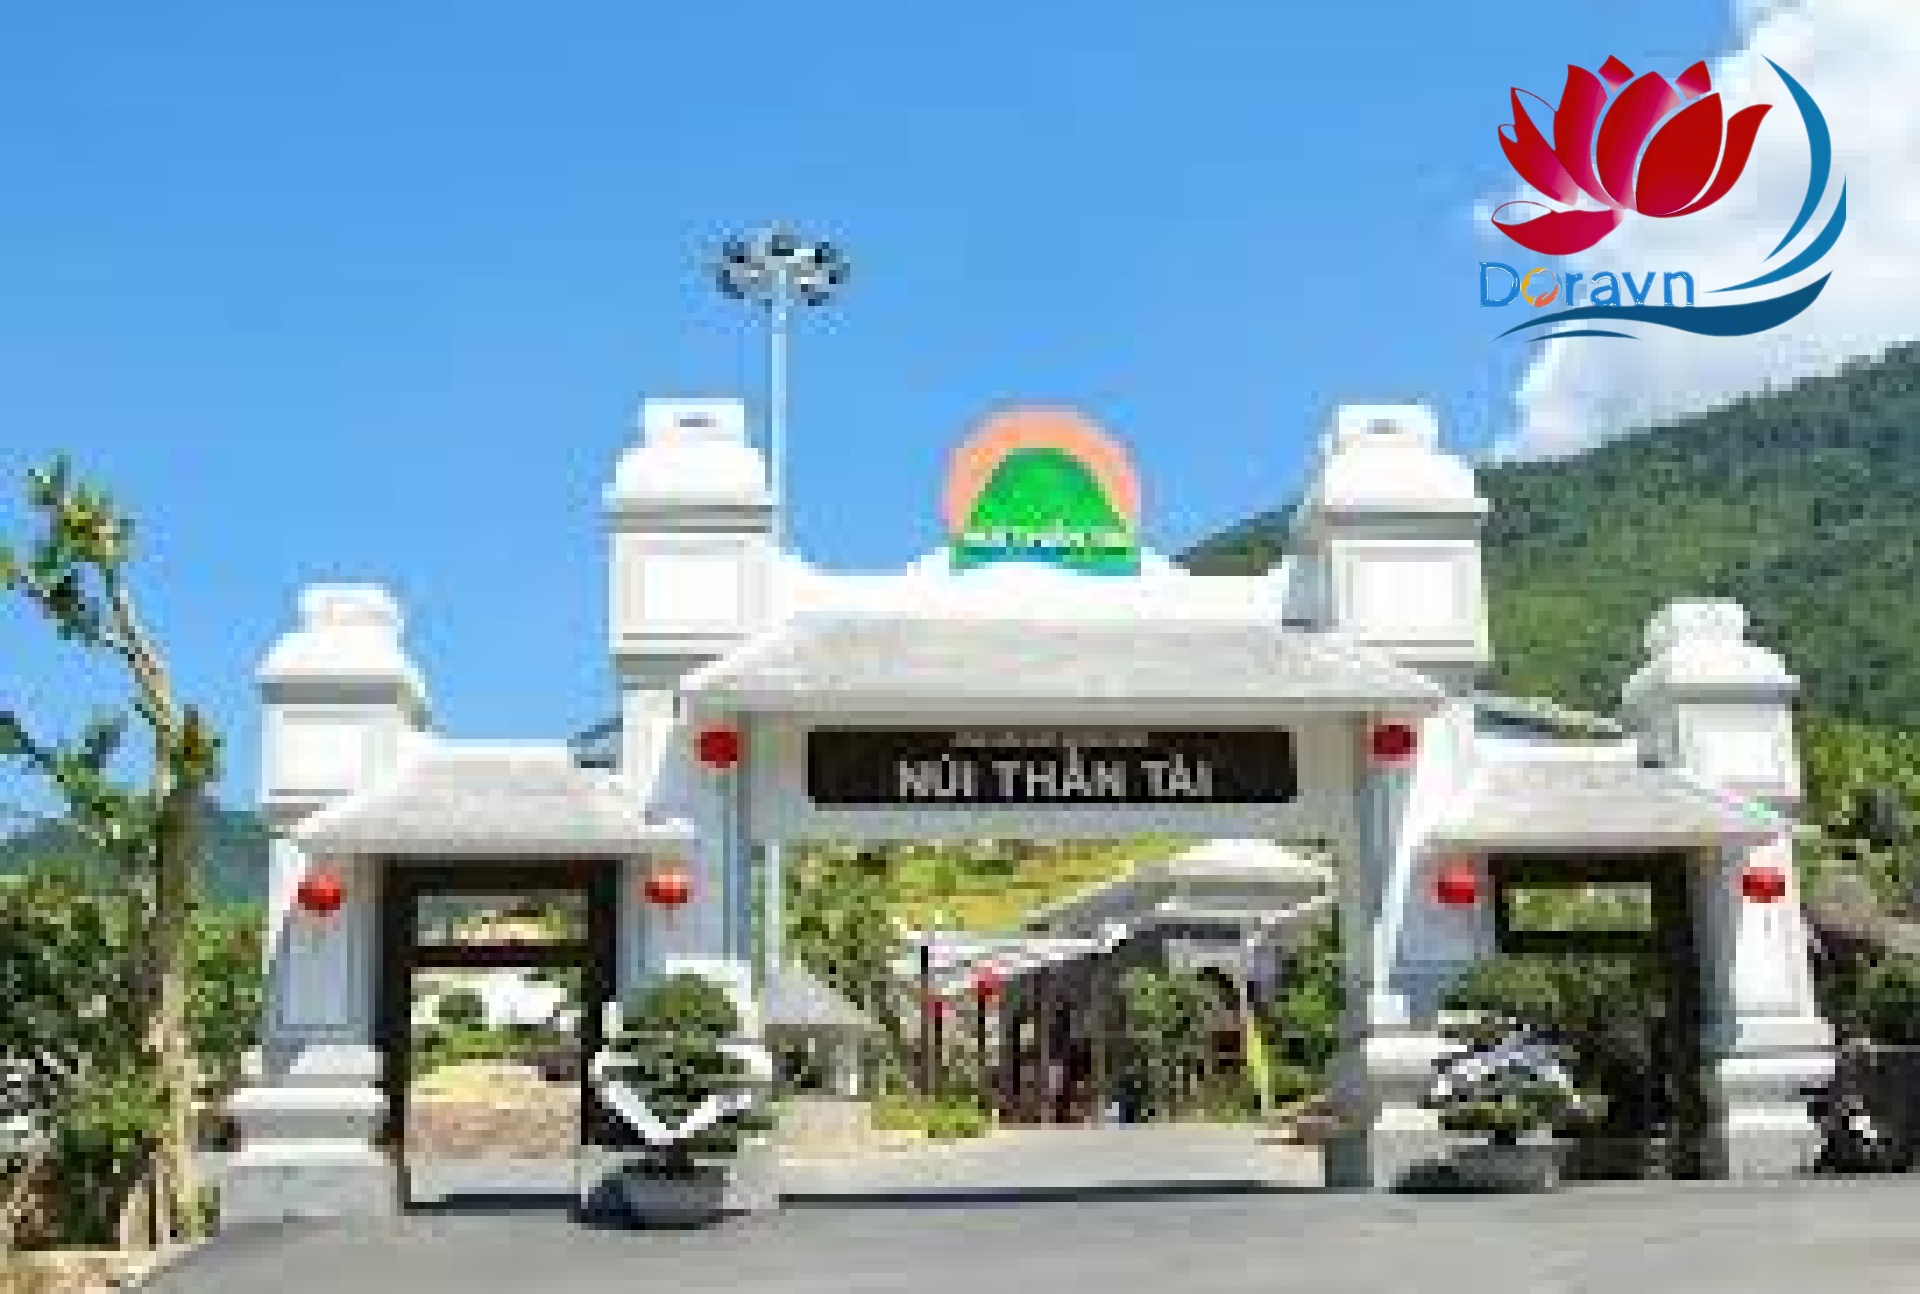 nui than tai hot springs park _Universal ticket package [TE12] - Doravn.vn